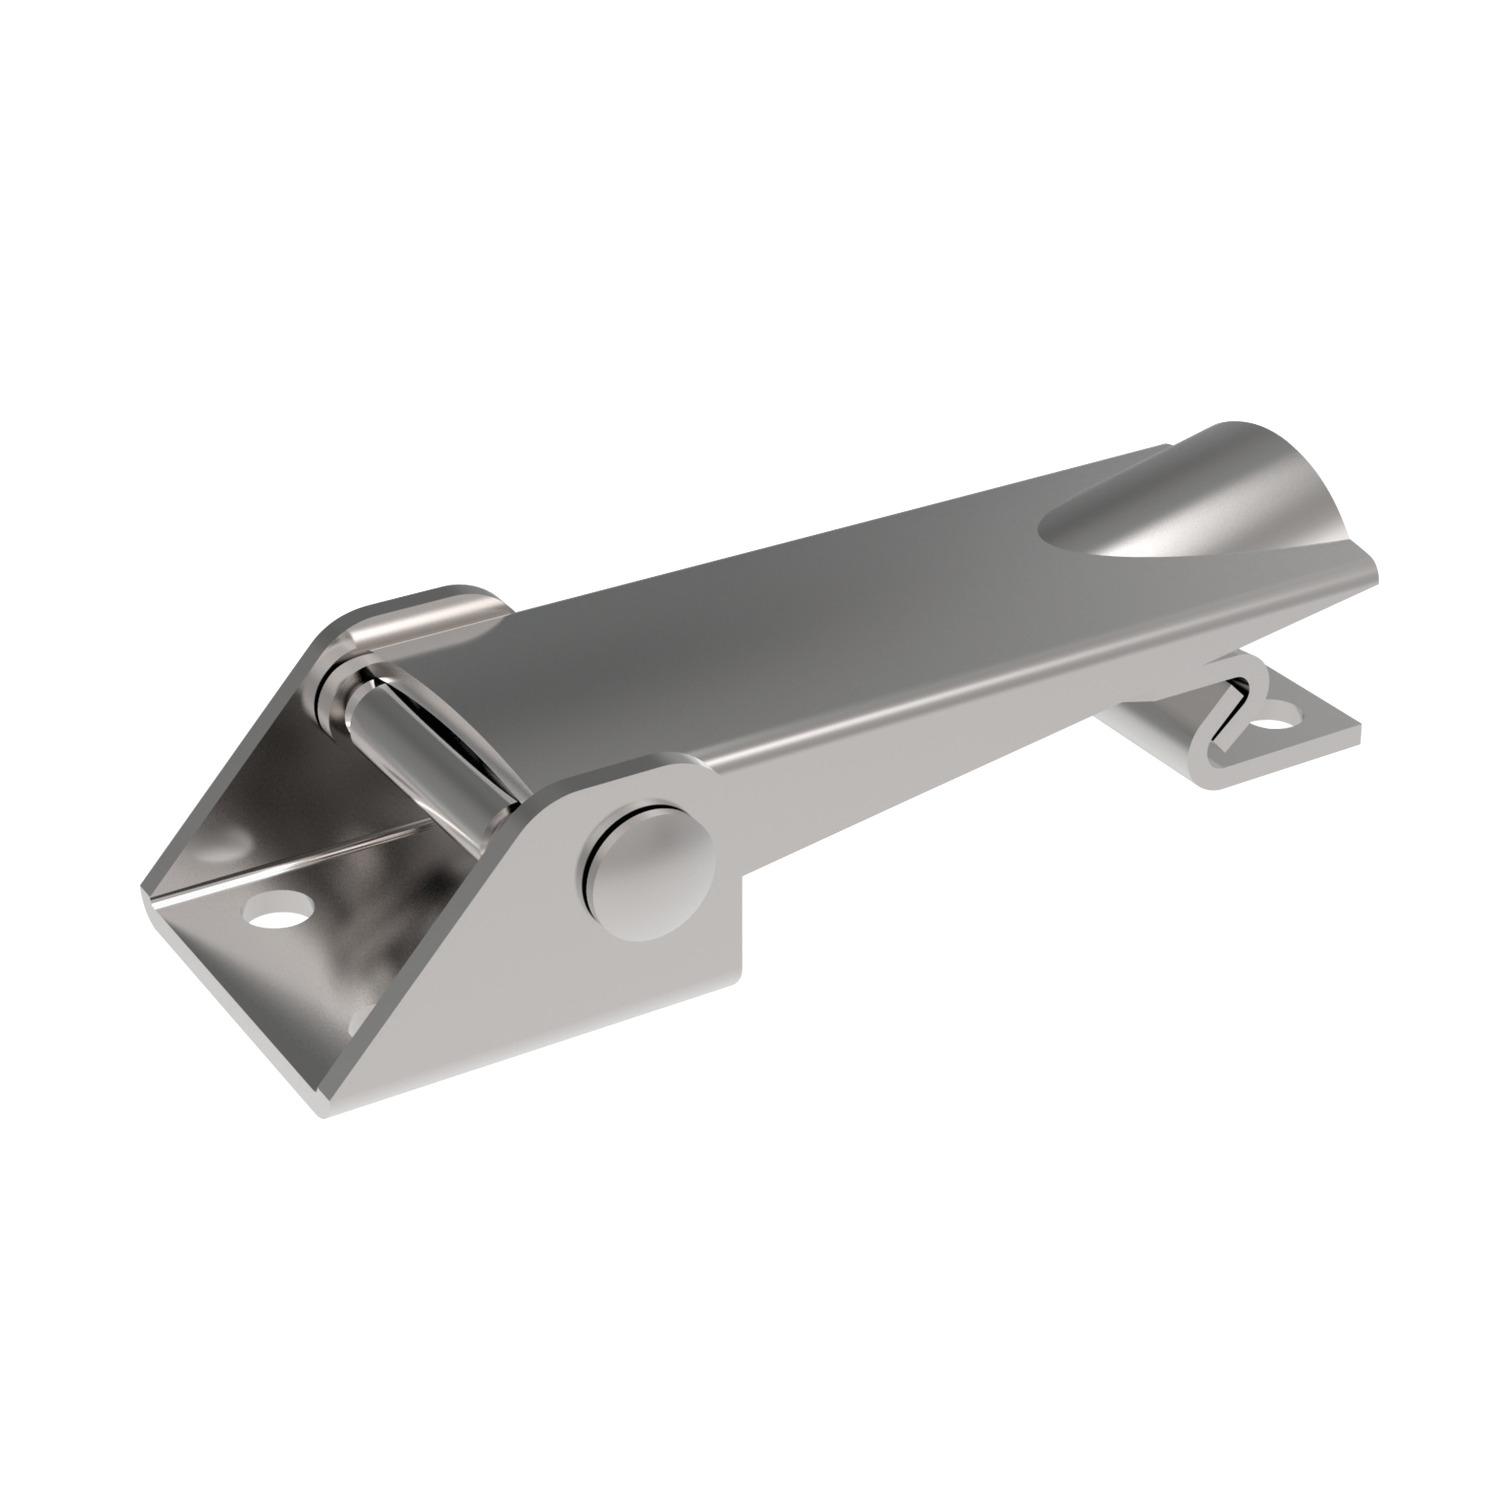 Toggle Latches 10mm of adjustment on this compact design draw latch. Available in zinc plated steel and AISI 304 stainless